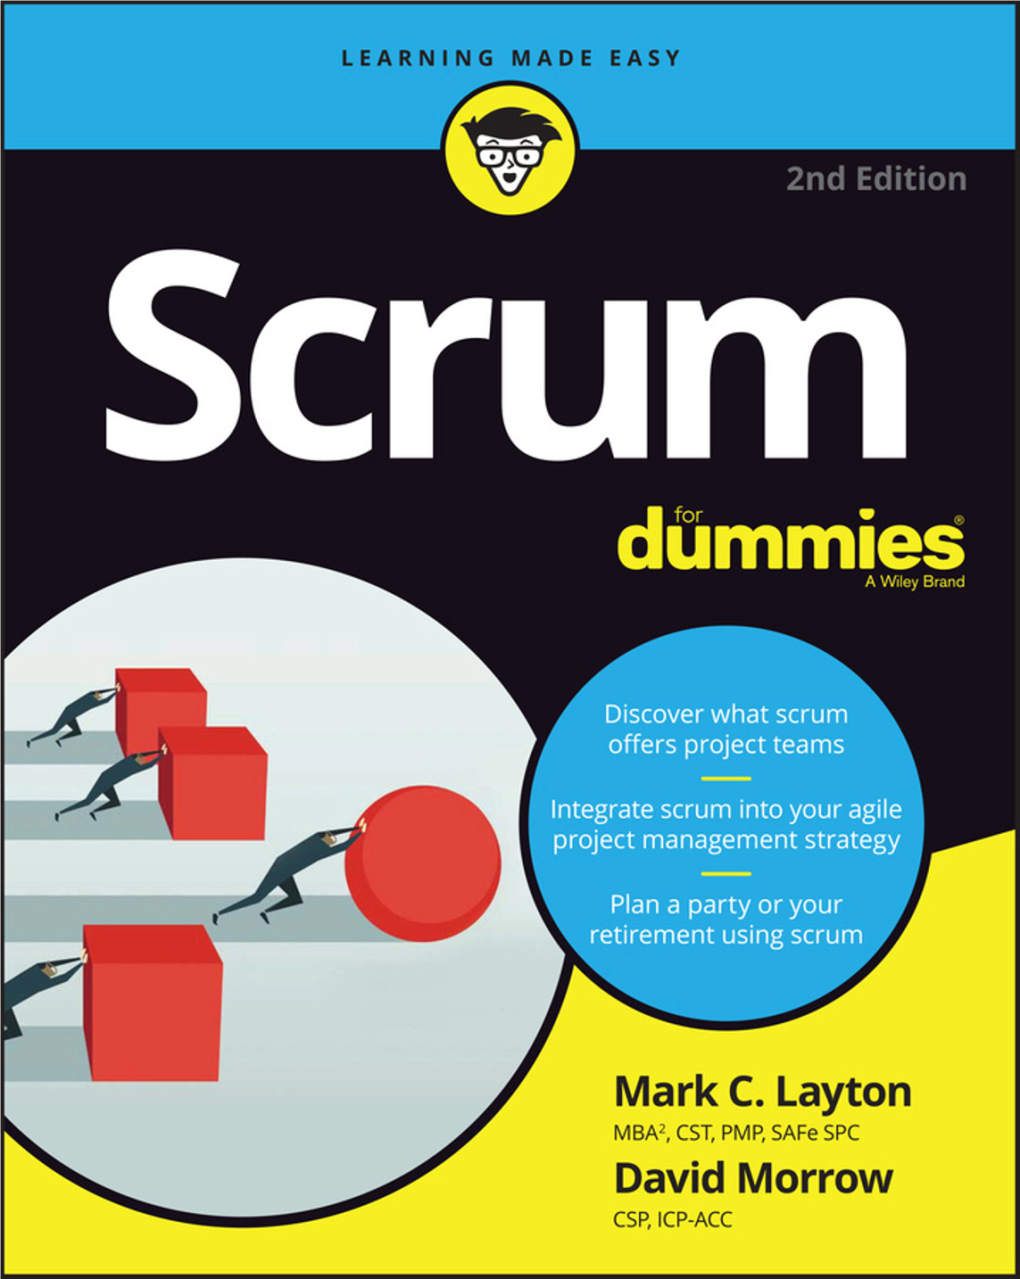 Scrum for Dummies®, 2Nd Edition Published By: John Wiley & Sons, Inc., 111 River Street, Hoboken, NJ 07030-5774